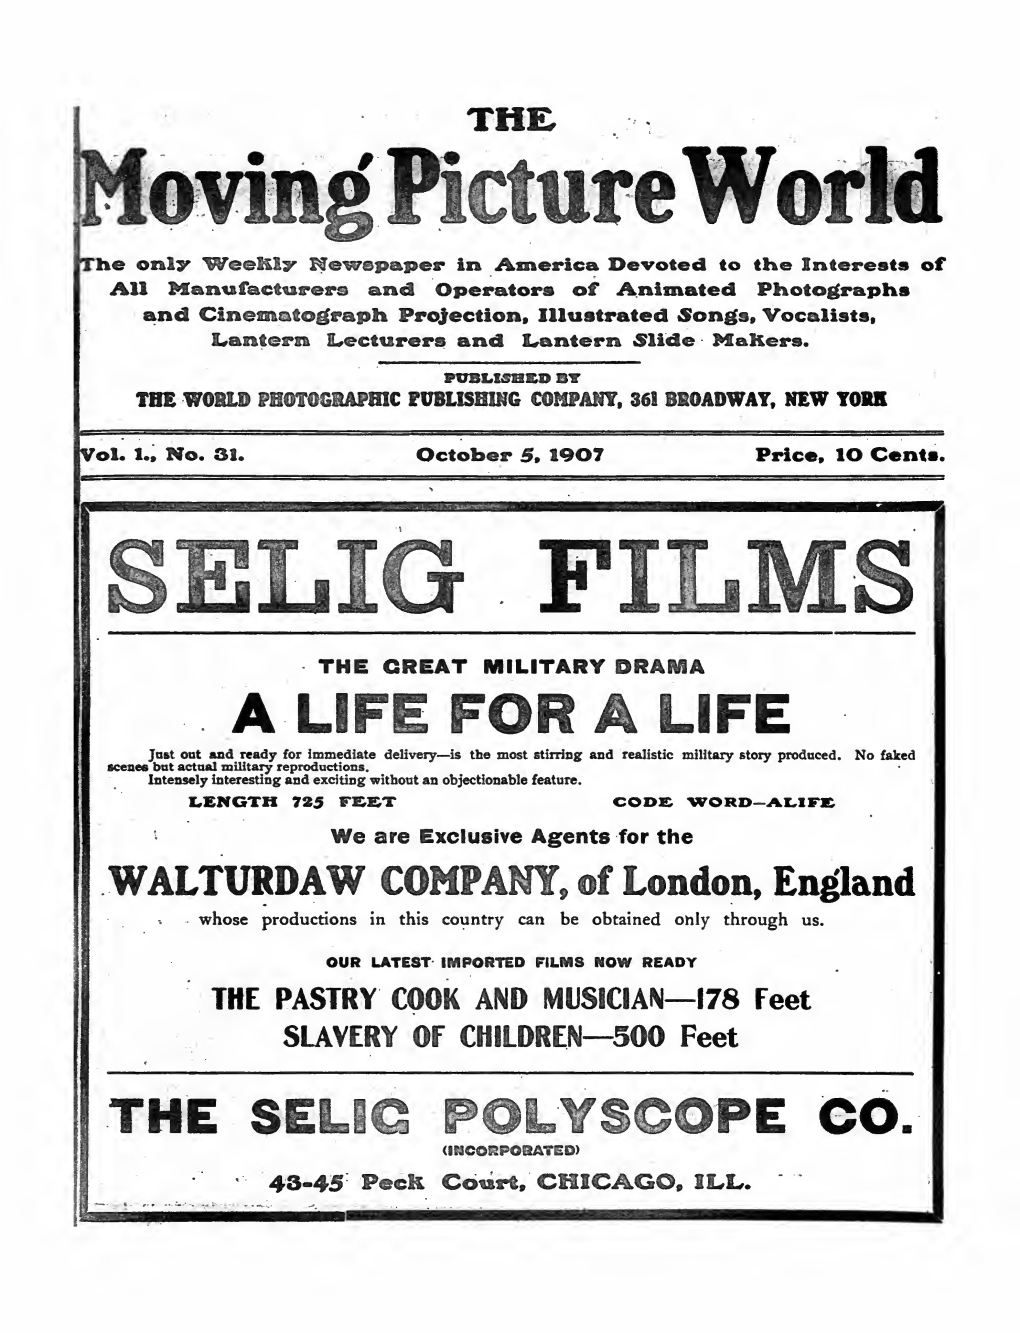 The Moving Picture World (October 1907)